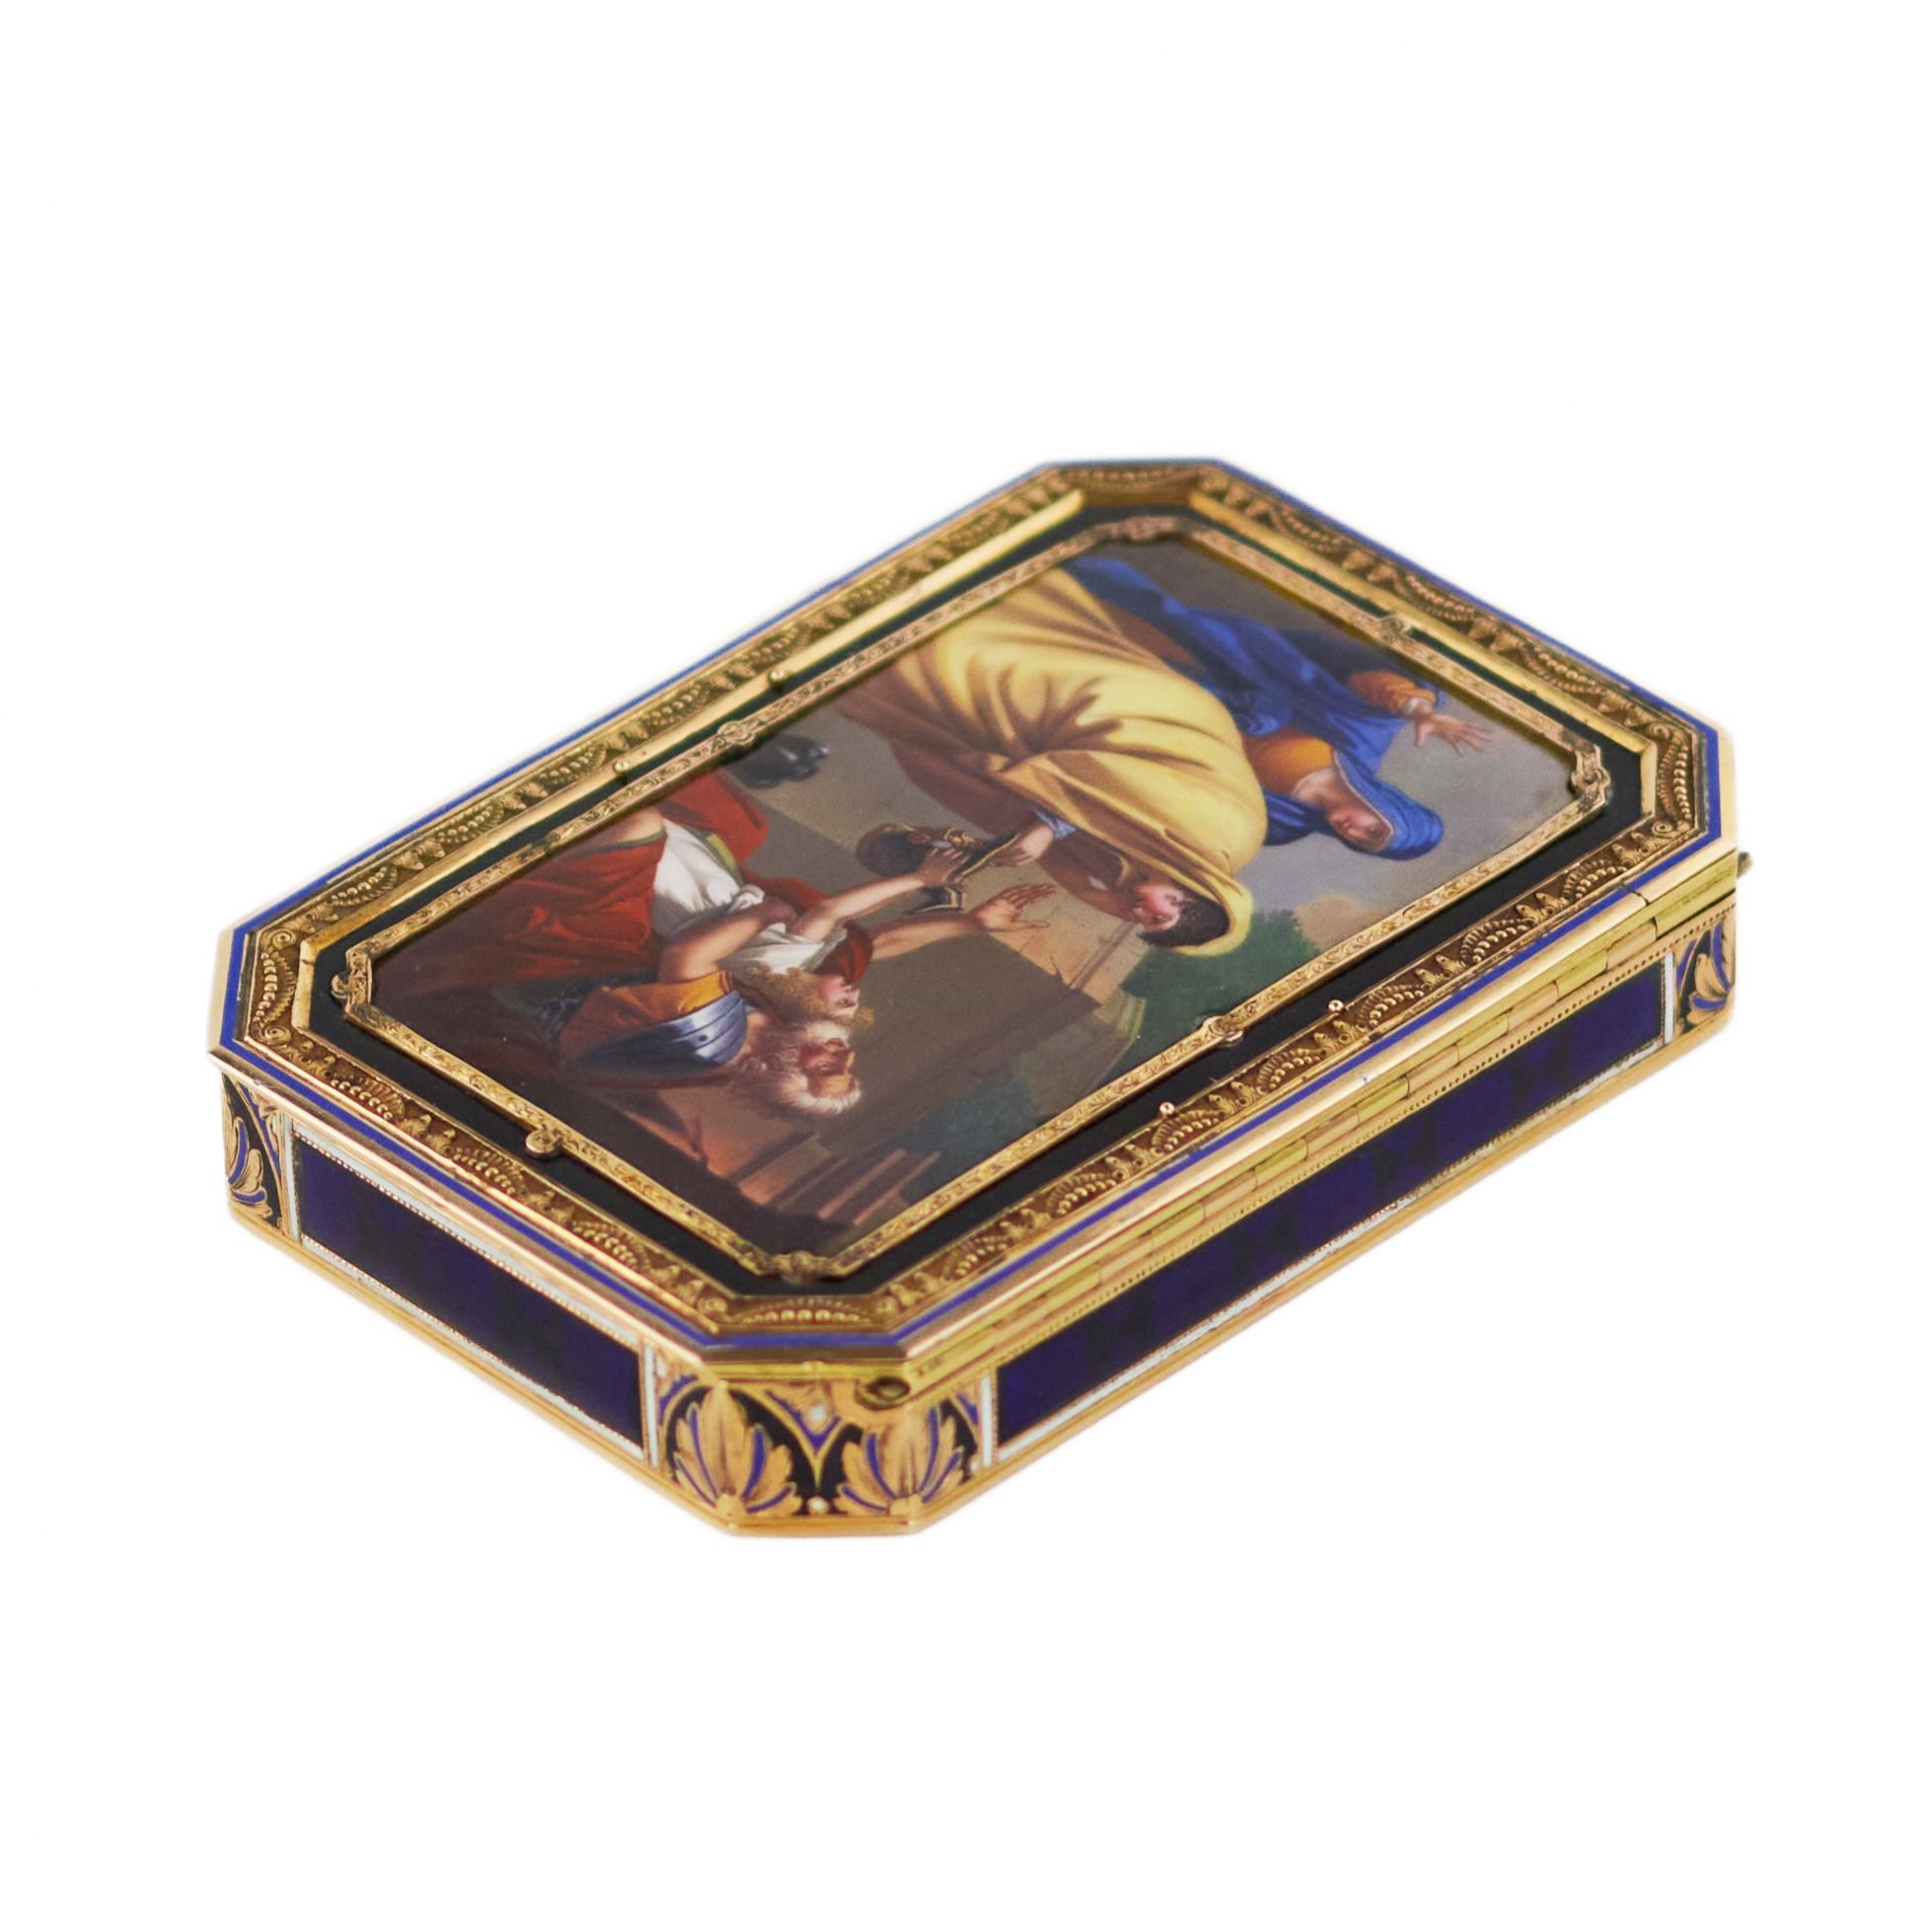 Gold snuff box with enamel. Jean George Remond & Compagnie. 1810. - Image 3 of 6